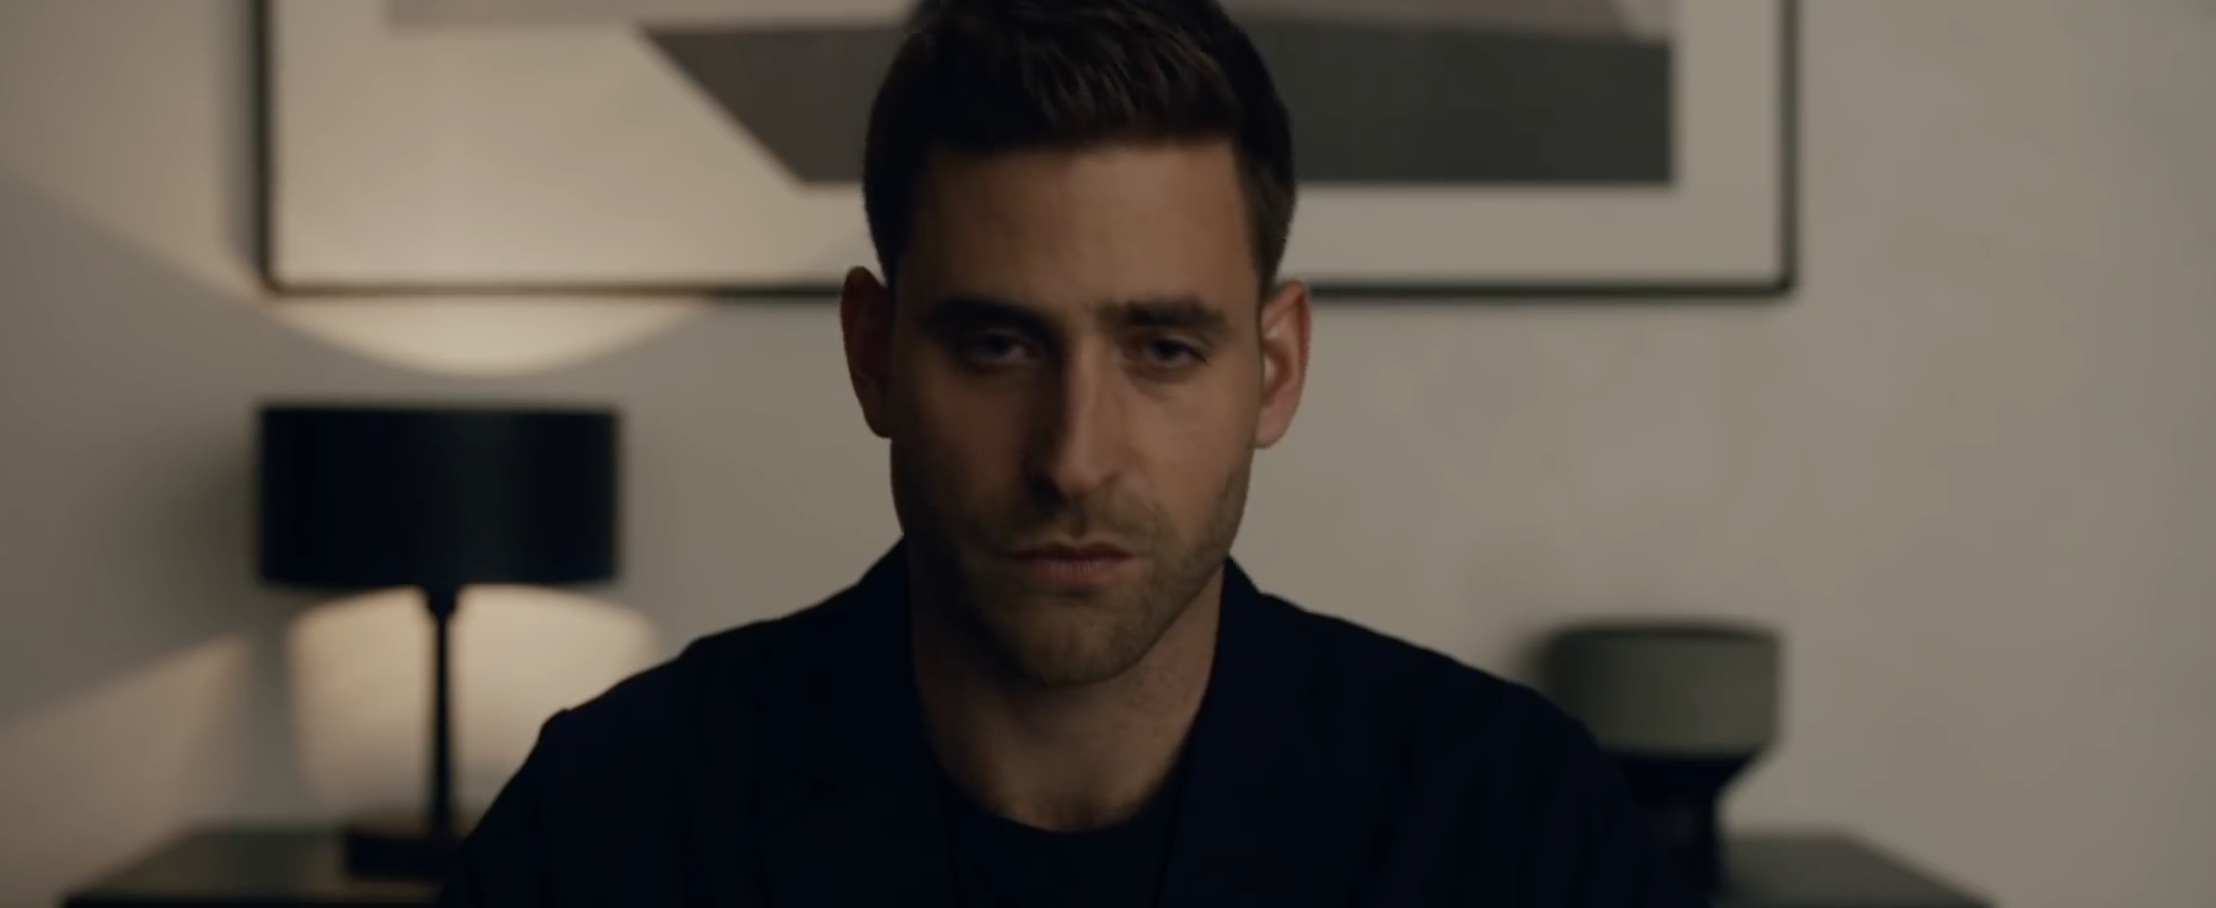 LRM EXCLUSIVE: Interview With The Invisible Man Himself, Oliver Jackson-Cohen